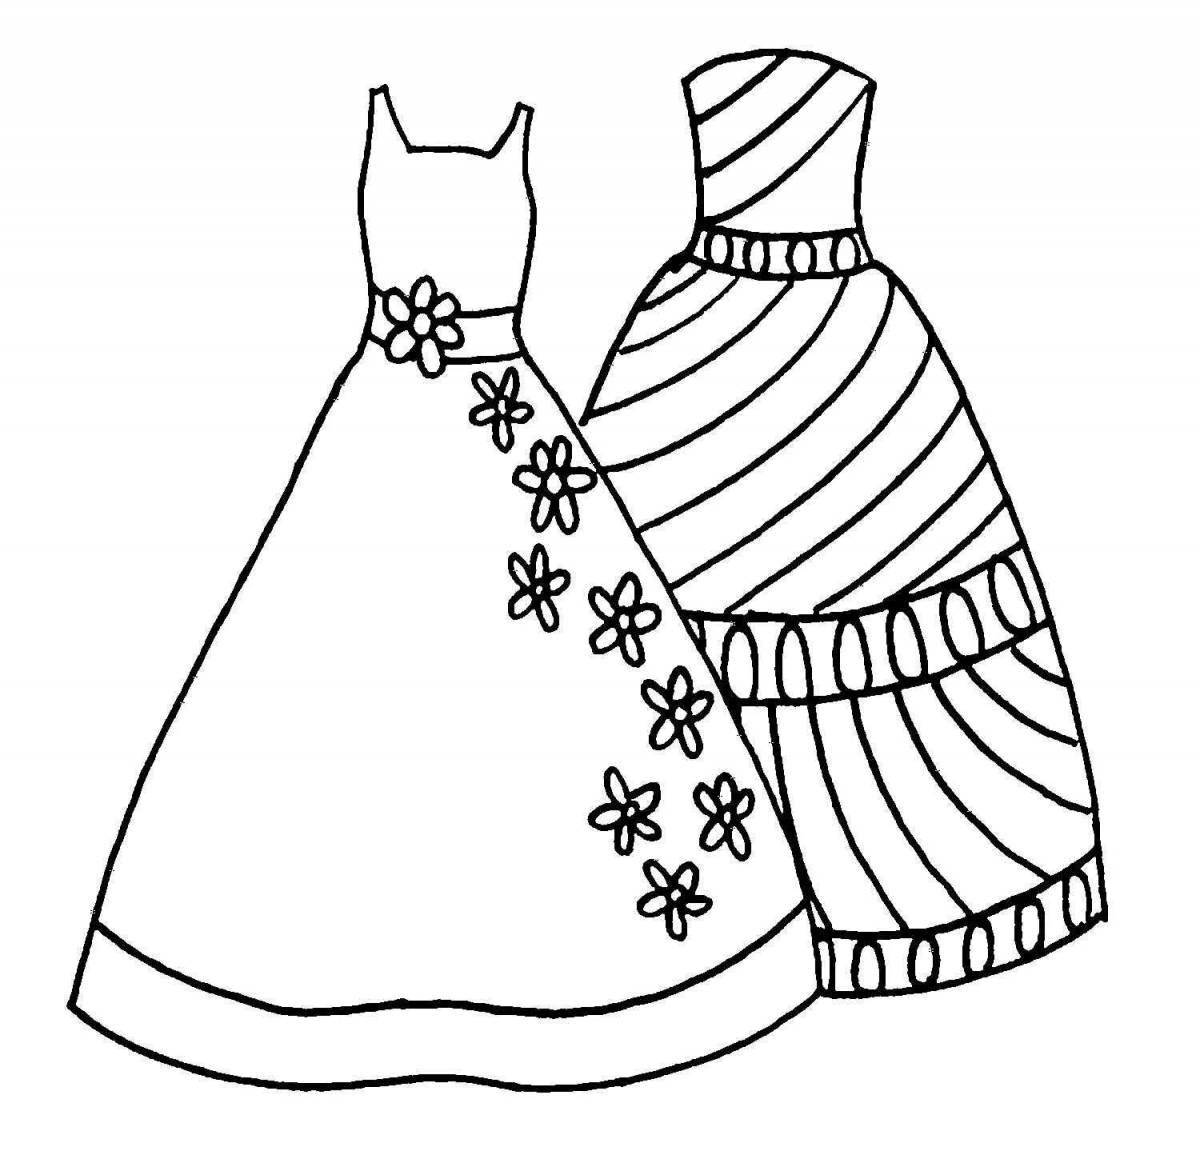 Adorable sundress coloring page for kids